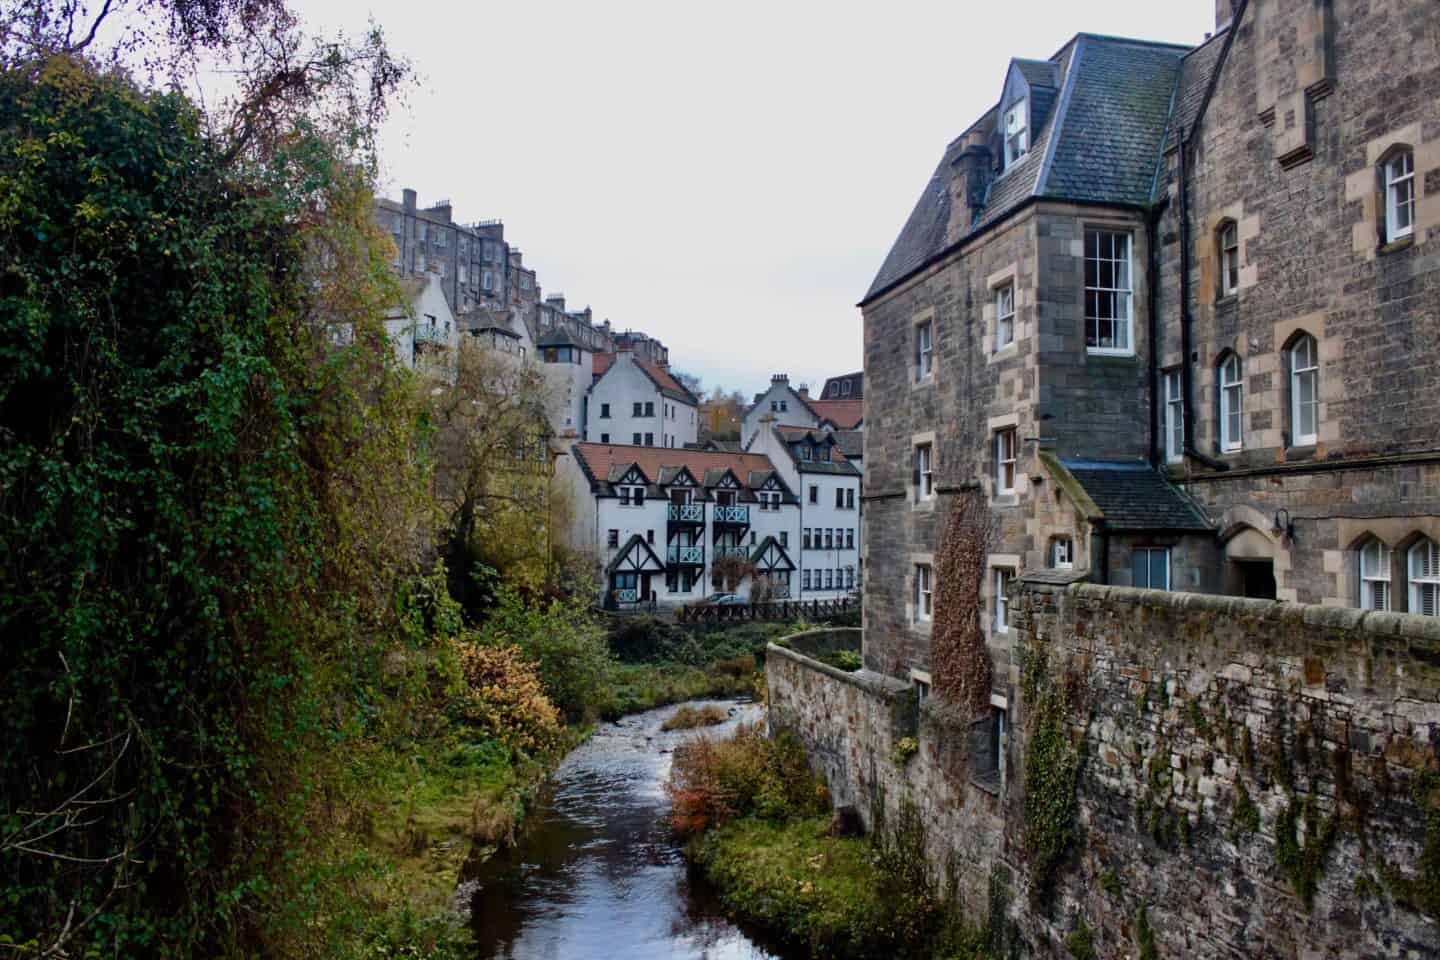 The start of the walk from the Water of Leith to Dean Village, Edinburgh